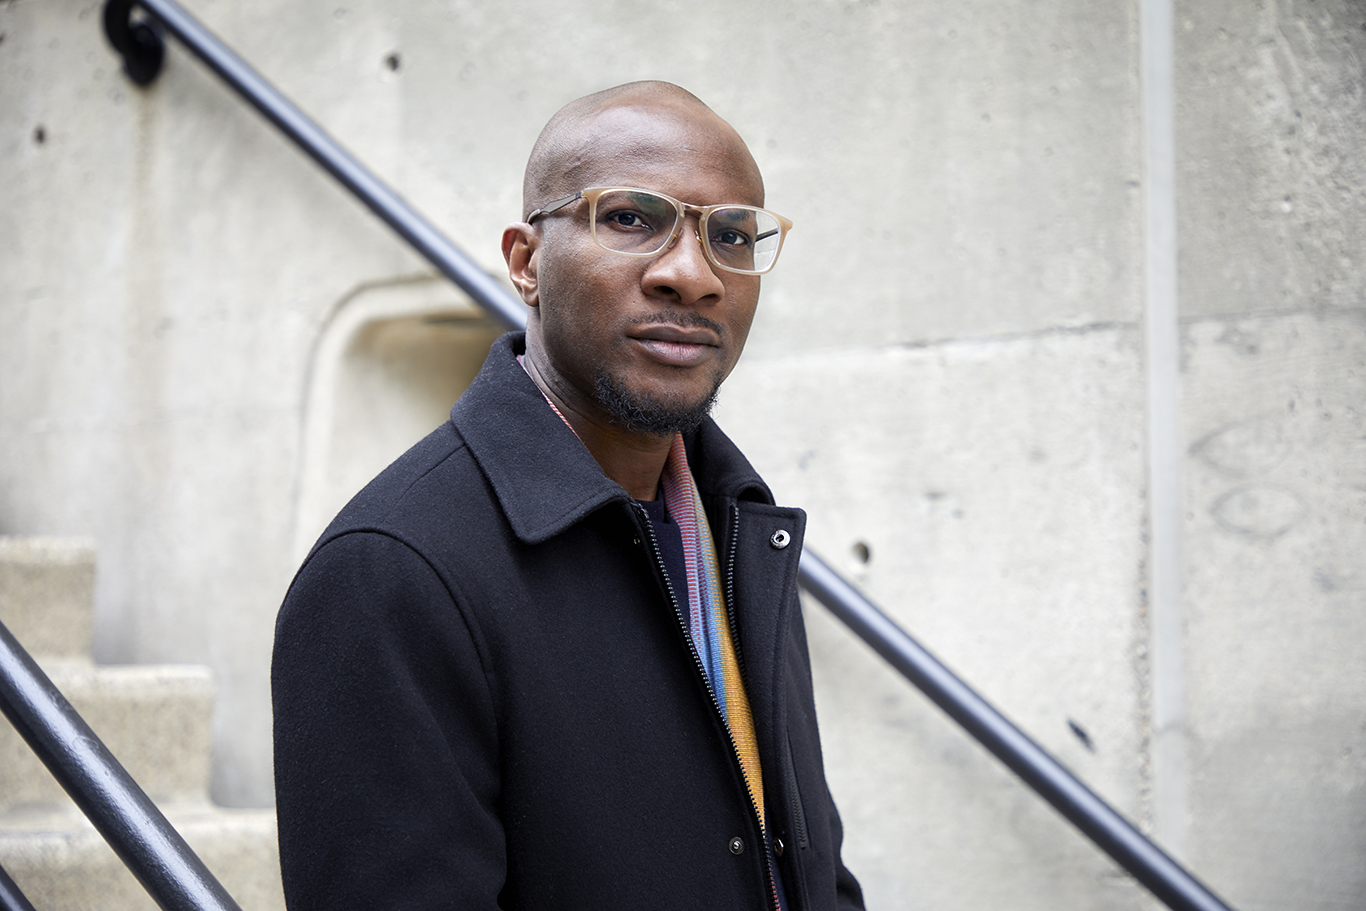 Nigerian-American writer and photographer Teju Cole gave the keynote address that kicked off the 2021 Power & Privilege Symposium.